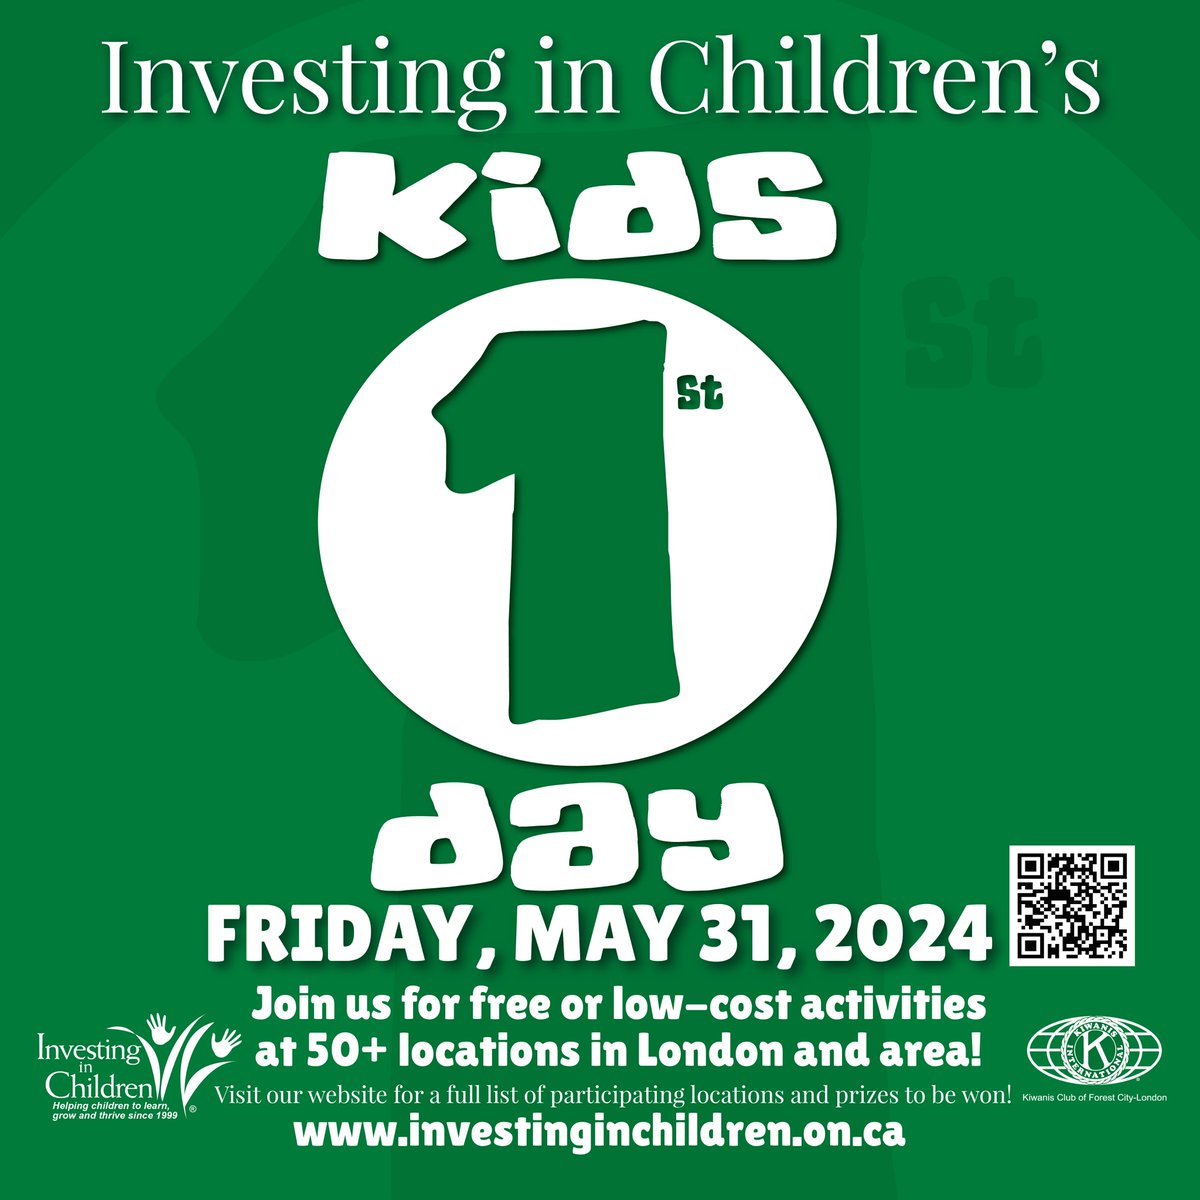 On May 31 PD Day, come with your school kids to enjoy a free activity! We'll be at Hillcrest Community Church, 1-3pm. Let's get active and creative! More info coming soon! #iickids1stday2024